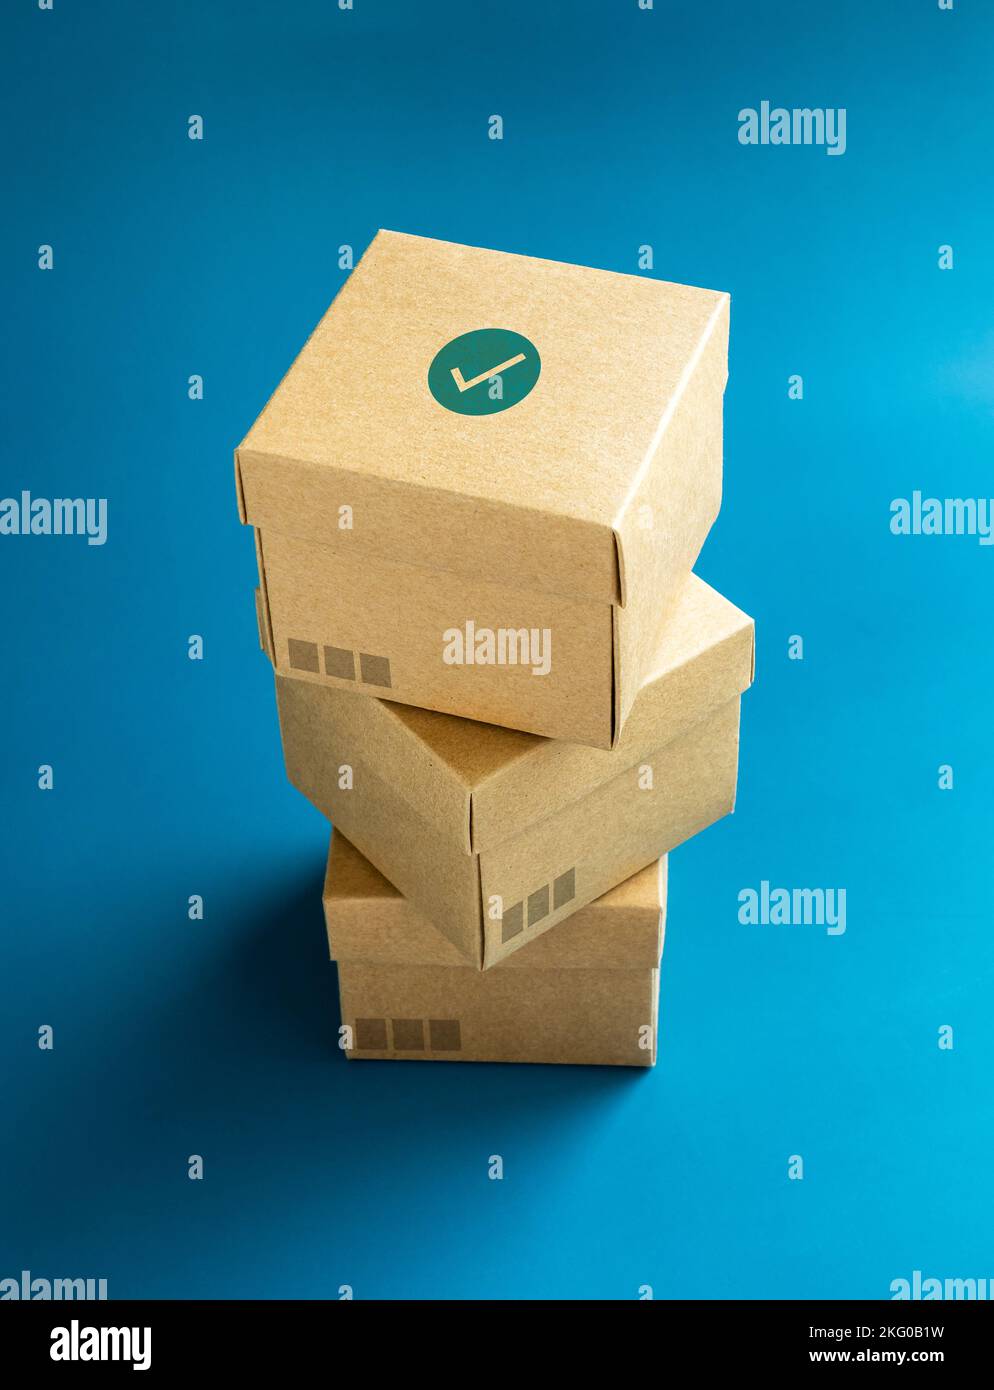 Green check mark icon on lid of cardboard parcel boxes stack on blue background, vertical style. Carton kraft paper box with lid on top. Delivery, pac Stock Photo